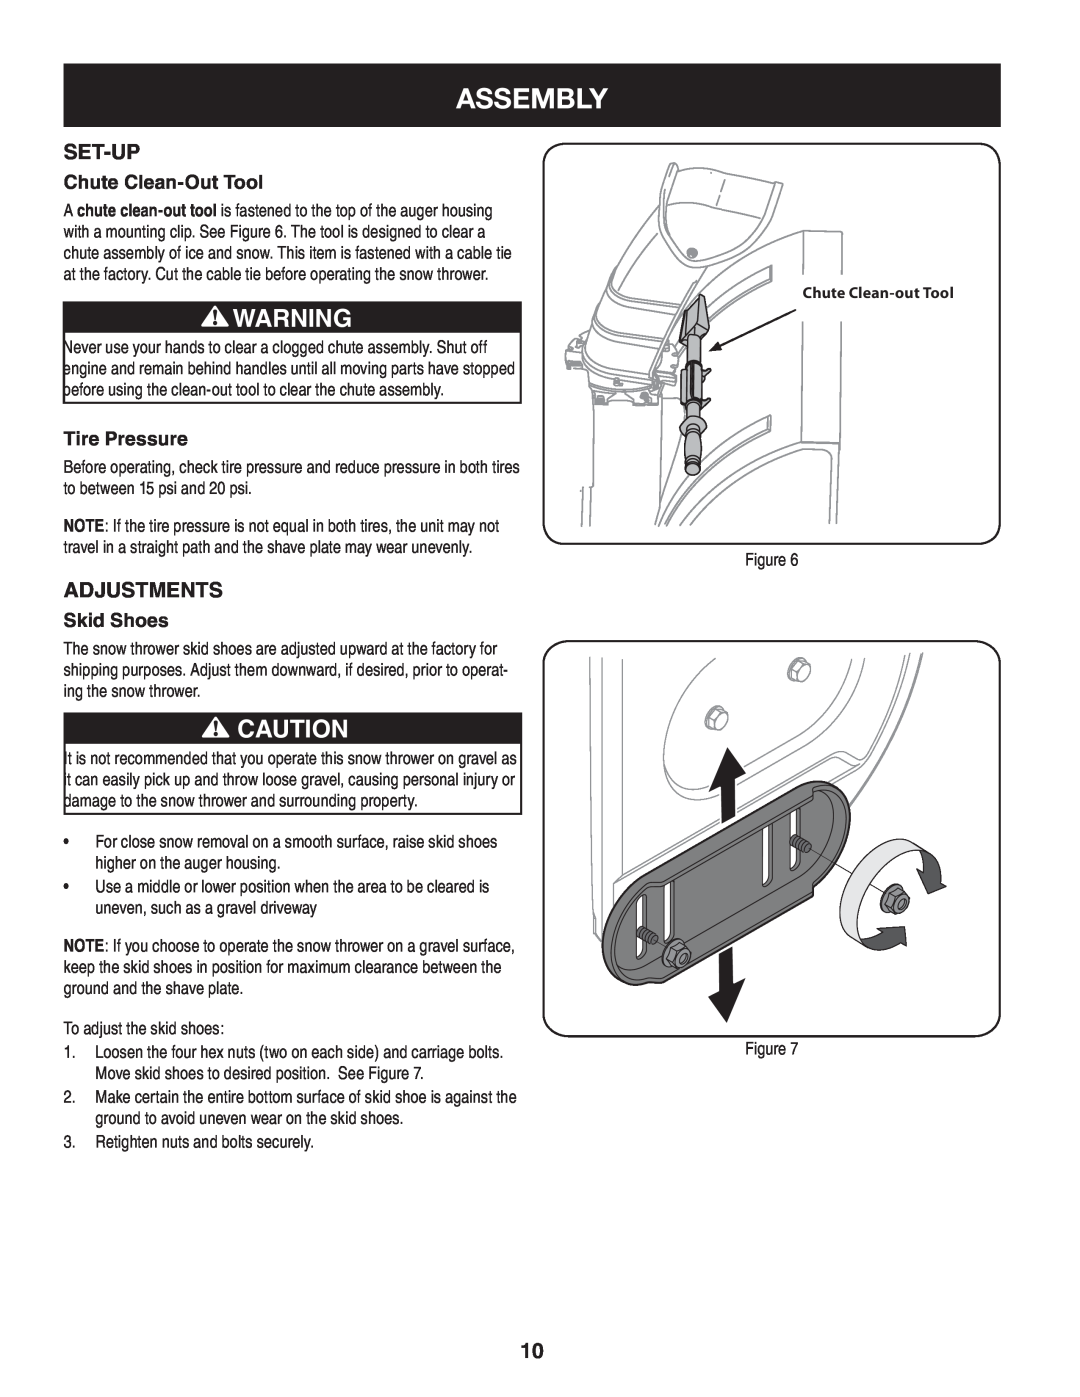 Craftsman 247.8819 operating instructions Assembly, Set-Up, Adjustments, Chute Clean-OutTool, Tire Pressure, Skid Shoes 